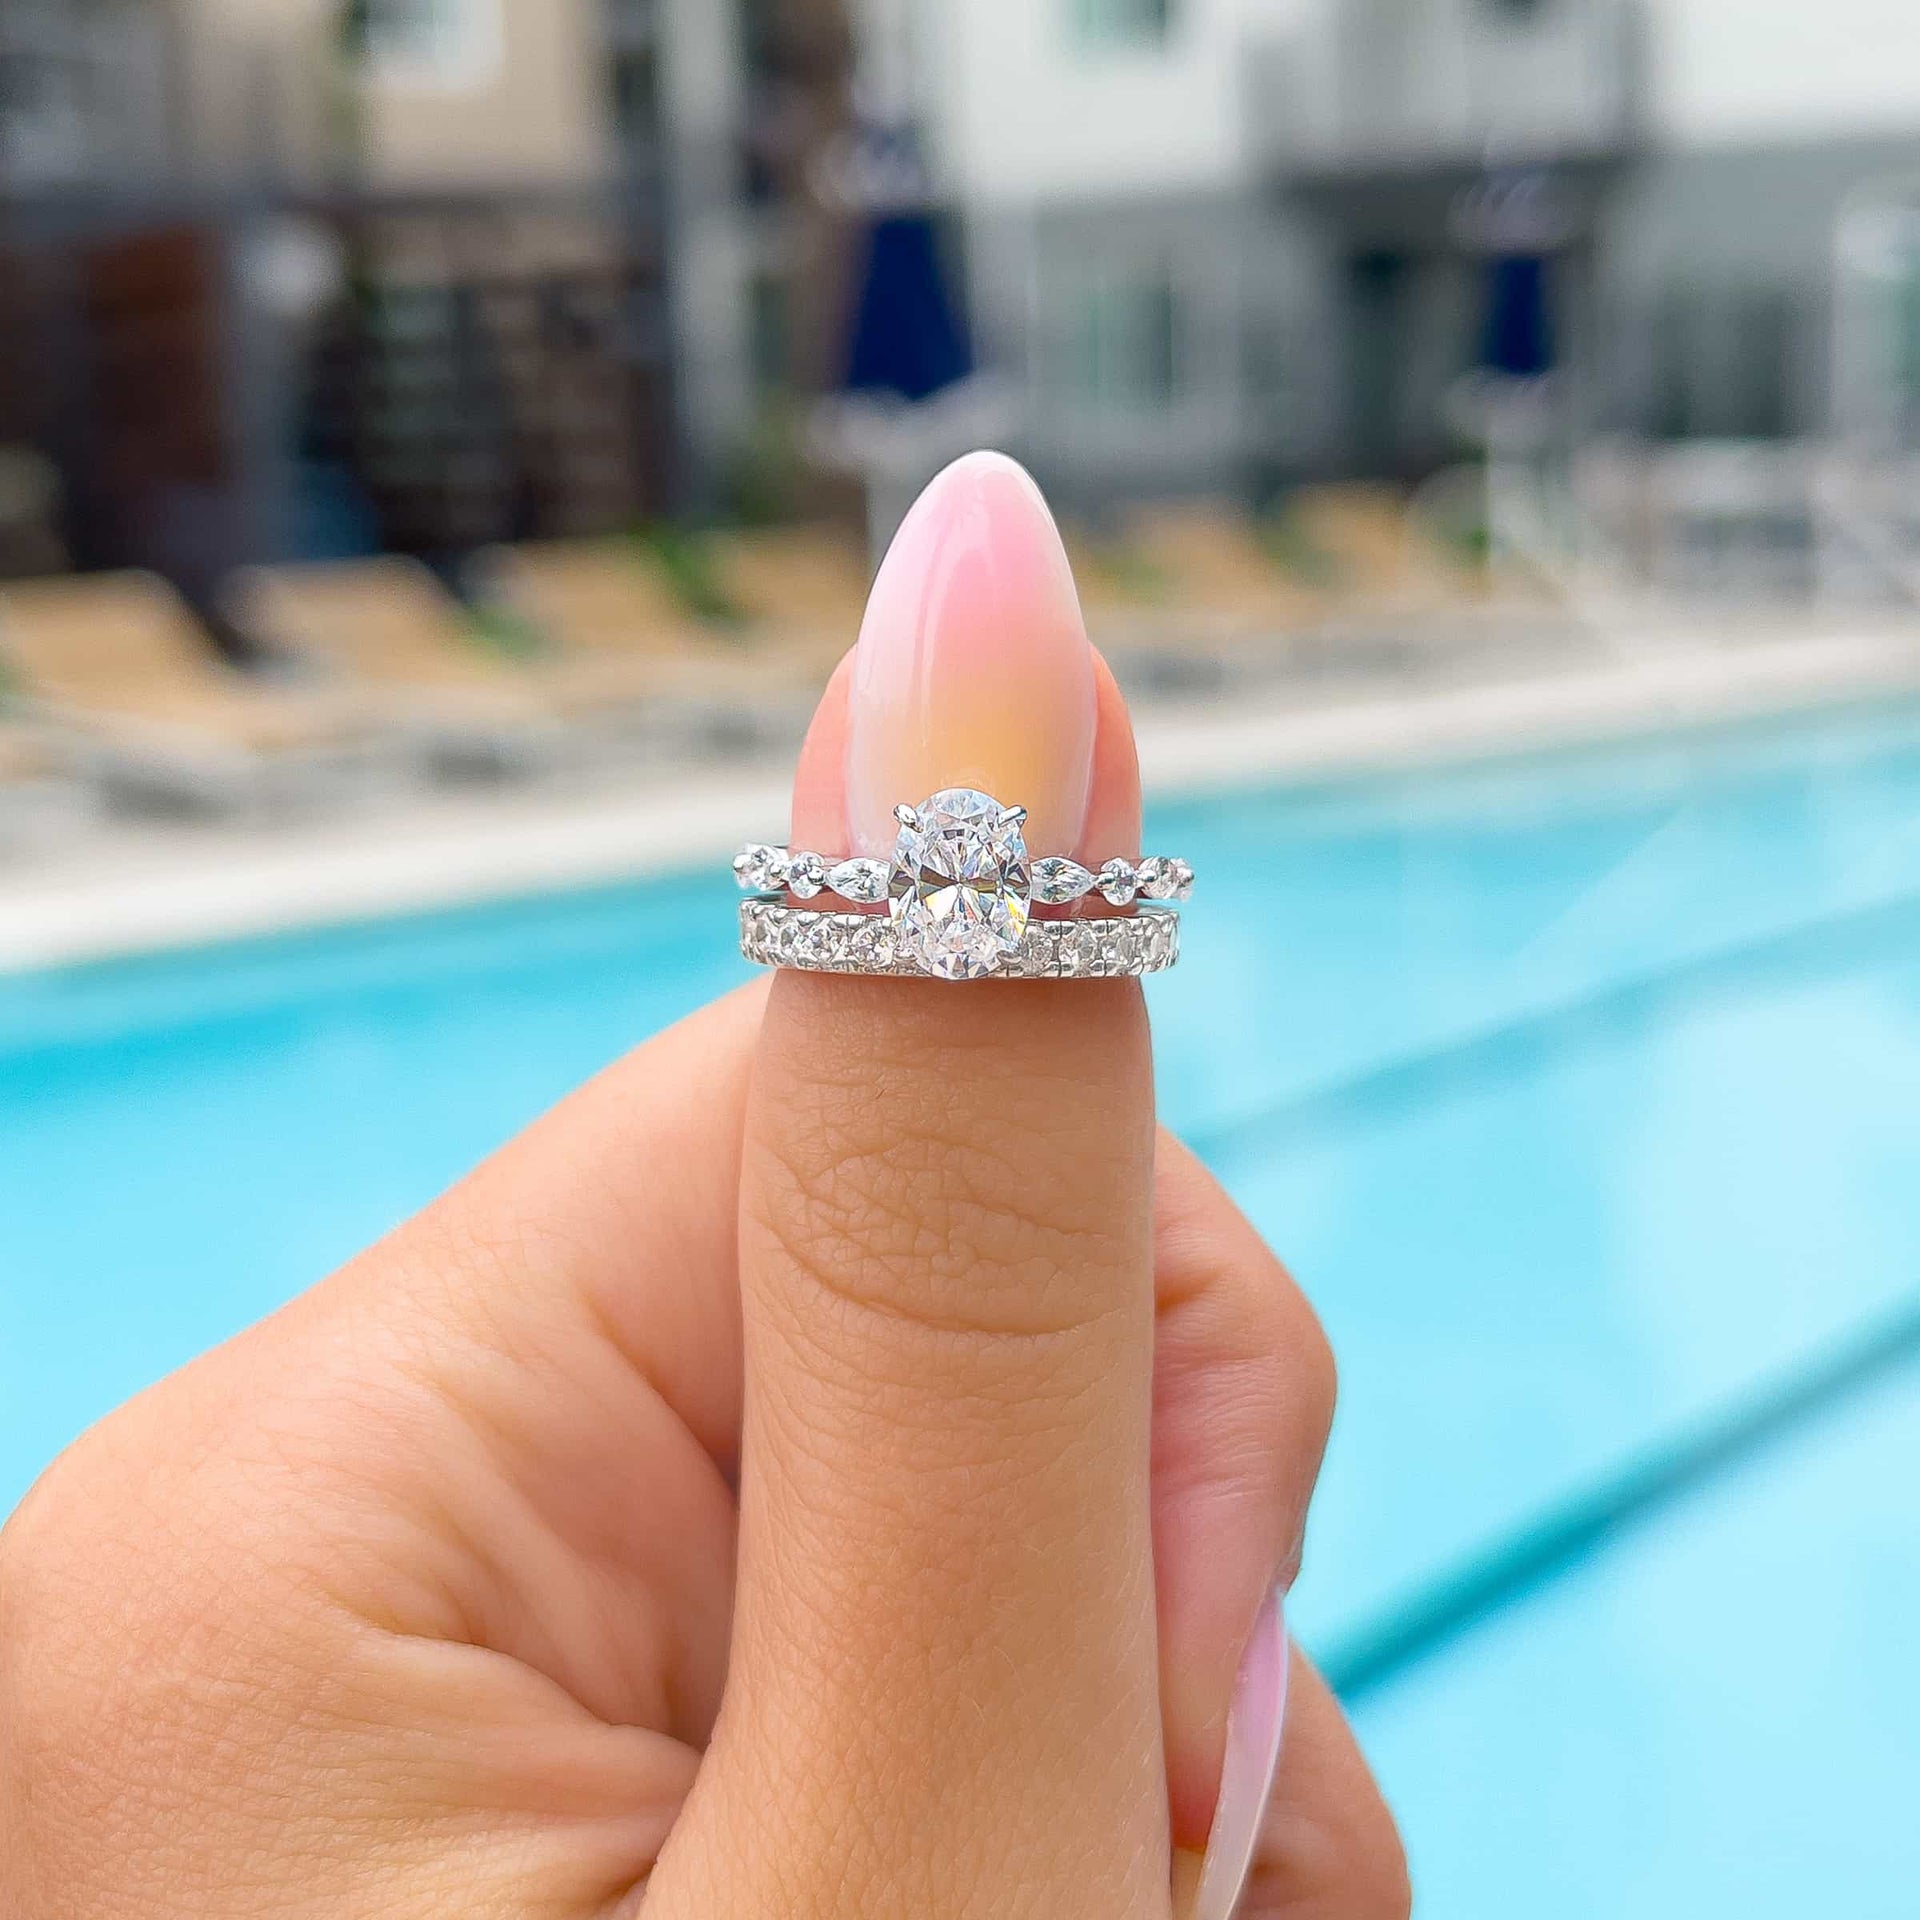 woman wearing silver engagement ring stack with eternity wedding band by pool